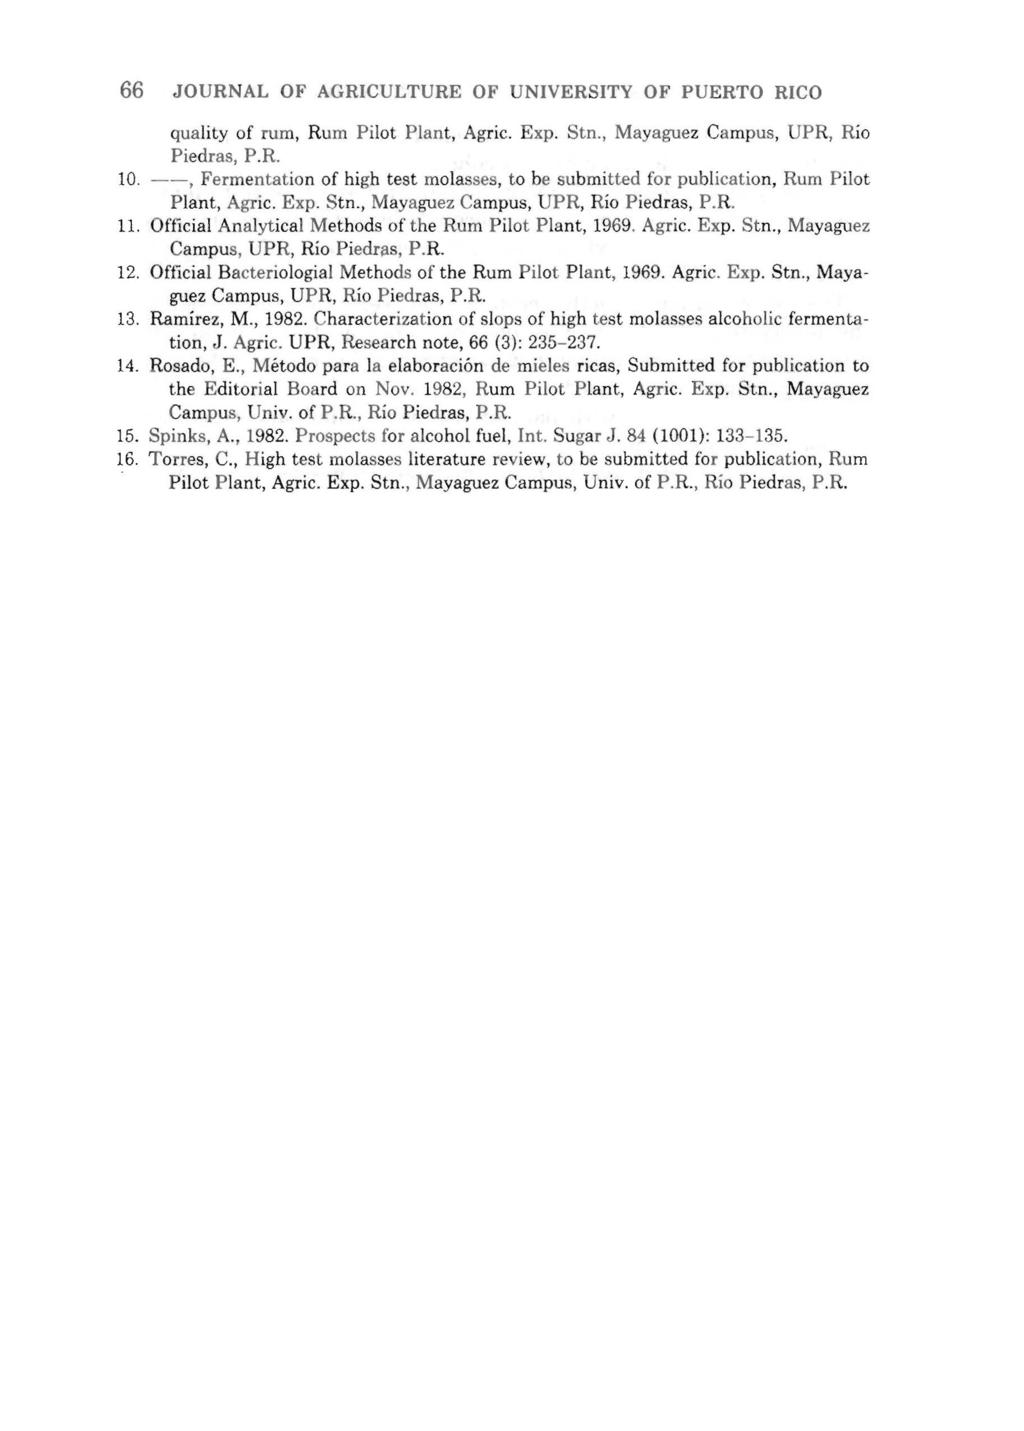 66 JOURNAL OF AGRICULTURE OF UNIVERSITY OF PUERTO RICO quality of rum, Rum Pilot Plant, Agric. Exp. Stn., Mayaguez Campus, UPR, Rio Piedras, P.R. 1.